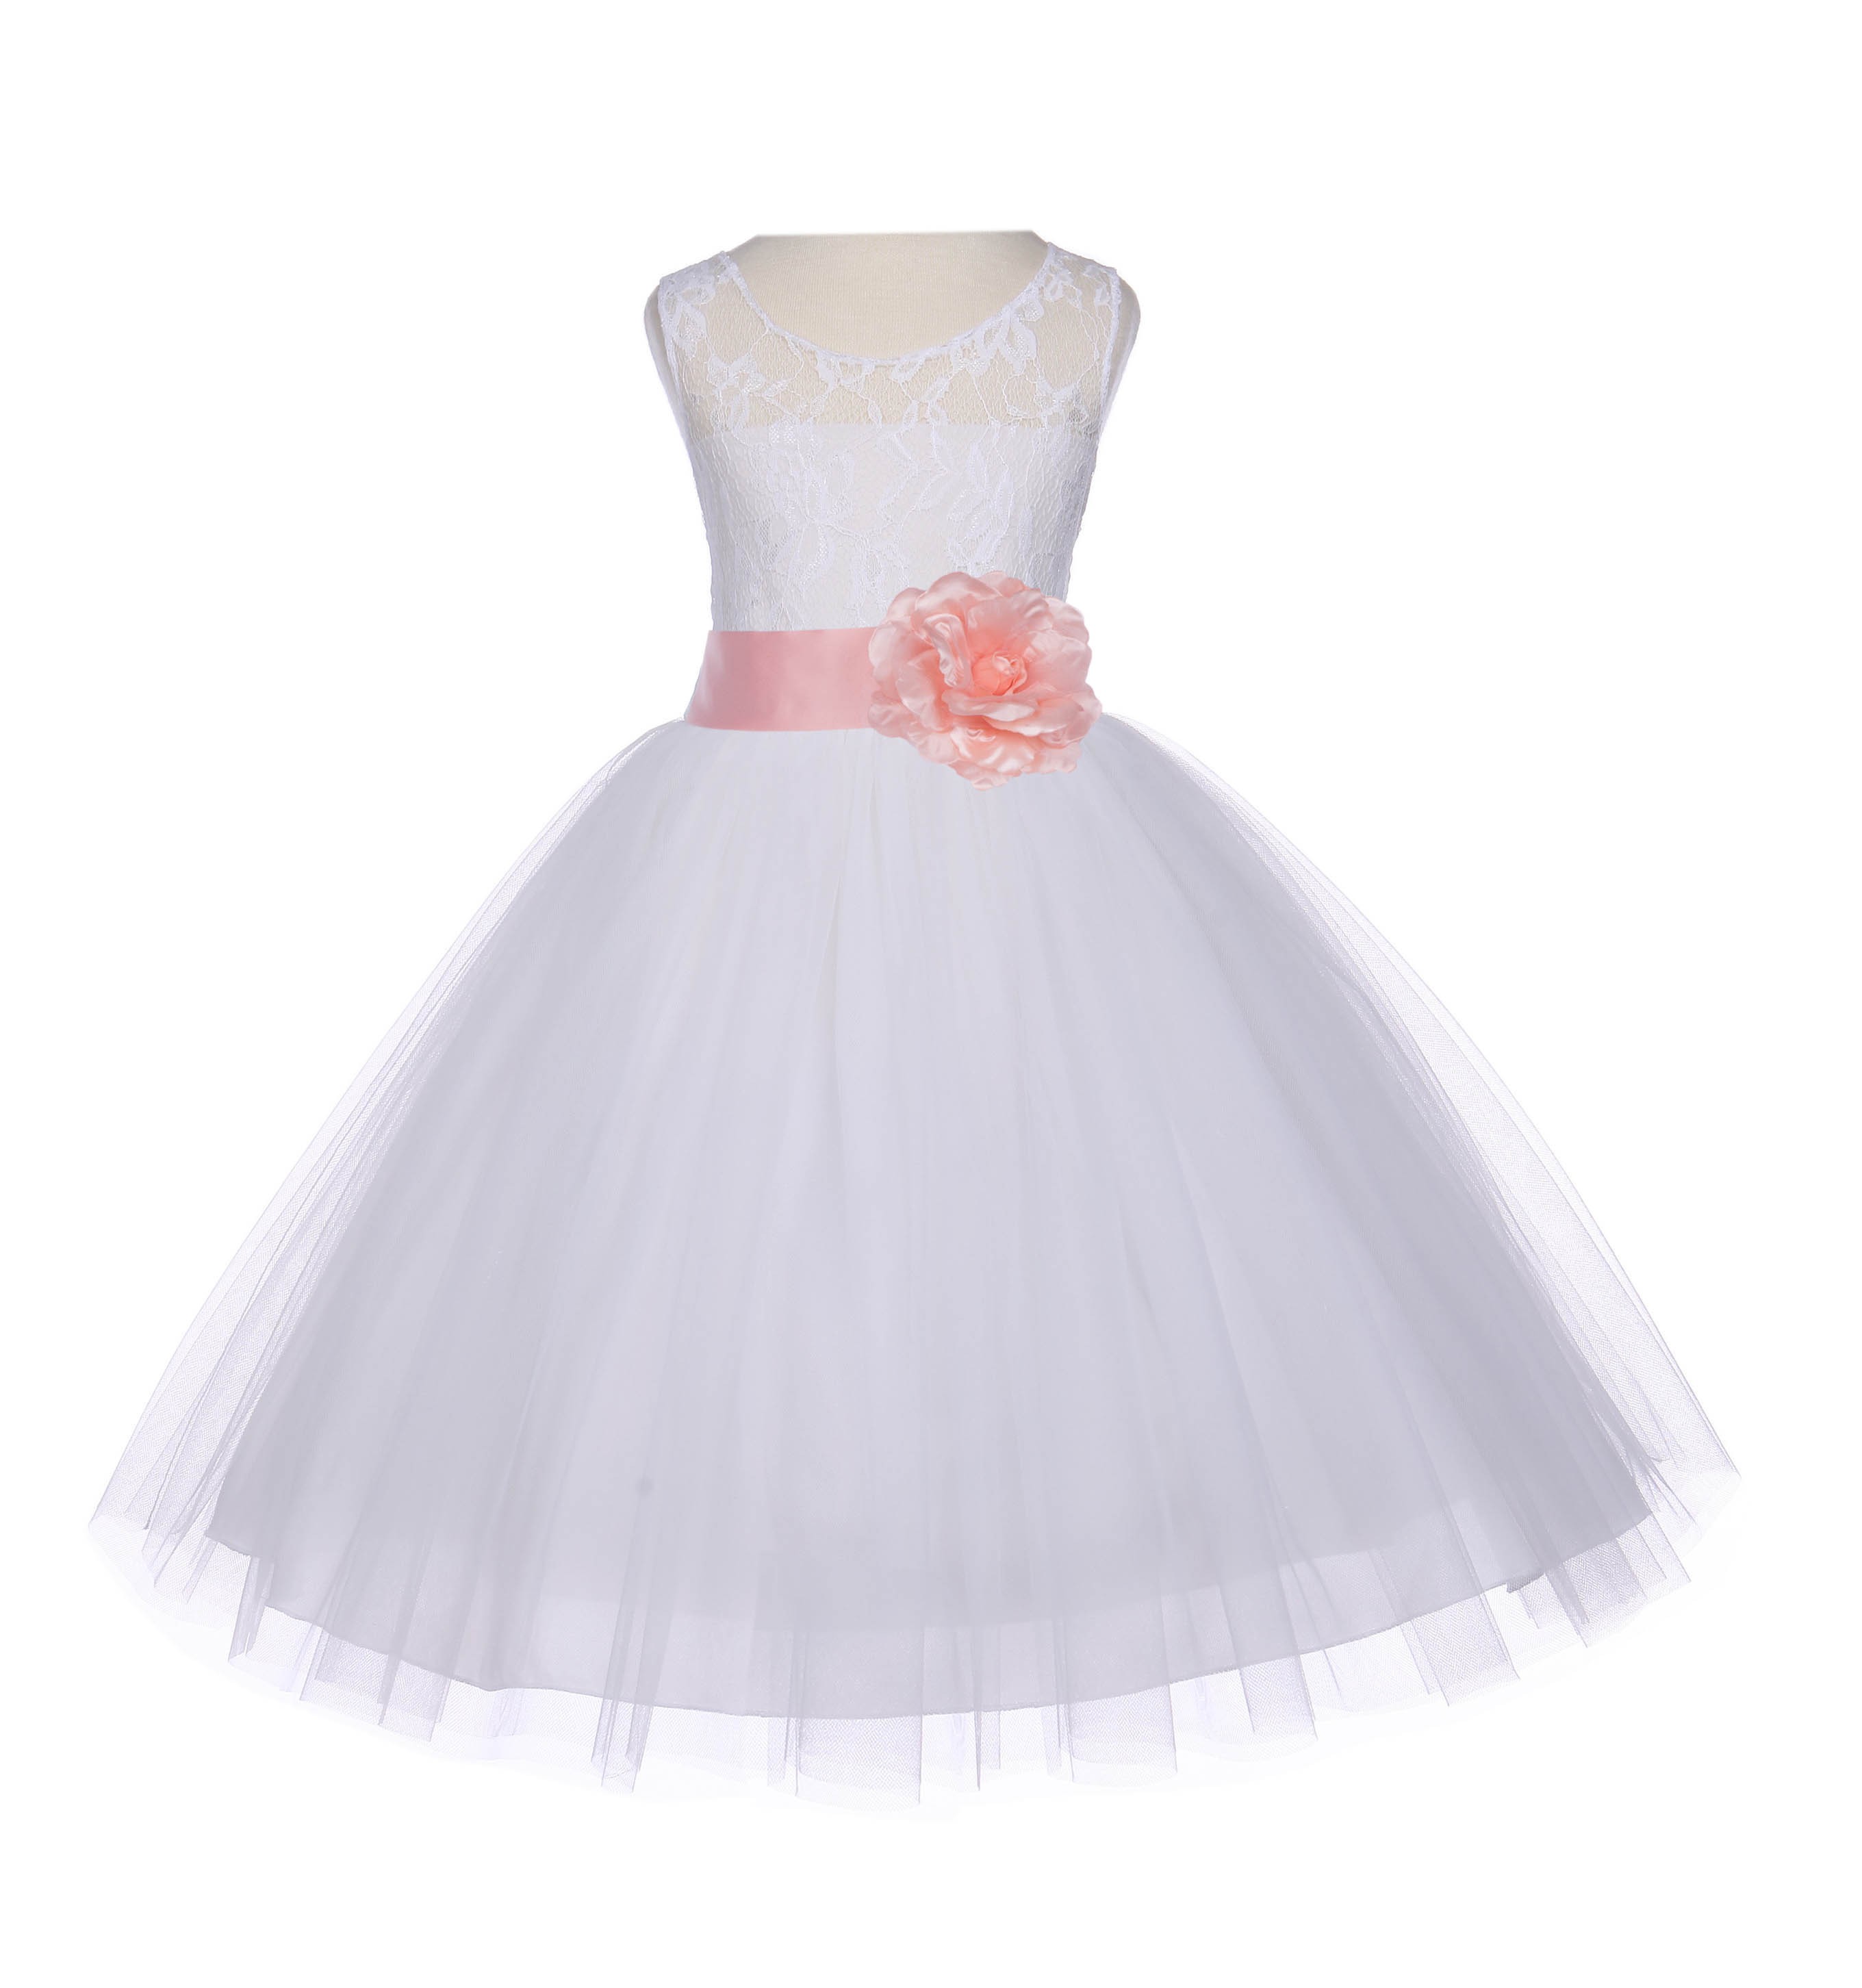 Ivory/Peach Floral Lace Bodice Tulle Flower Girl Dress Bridesmaid 153S